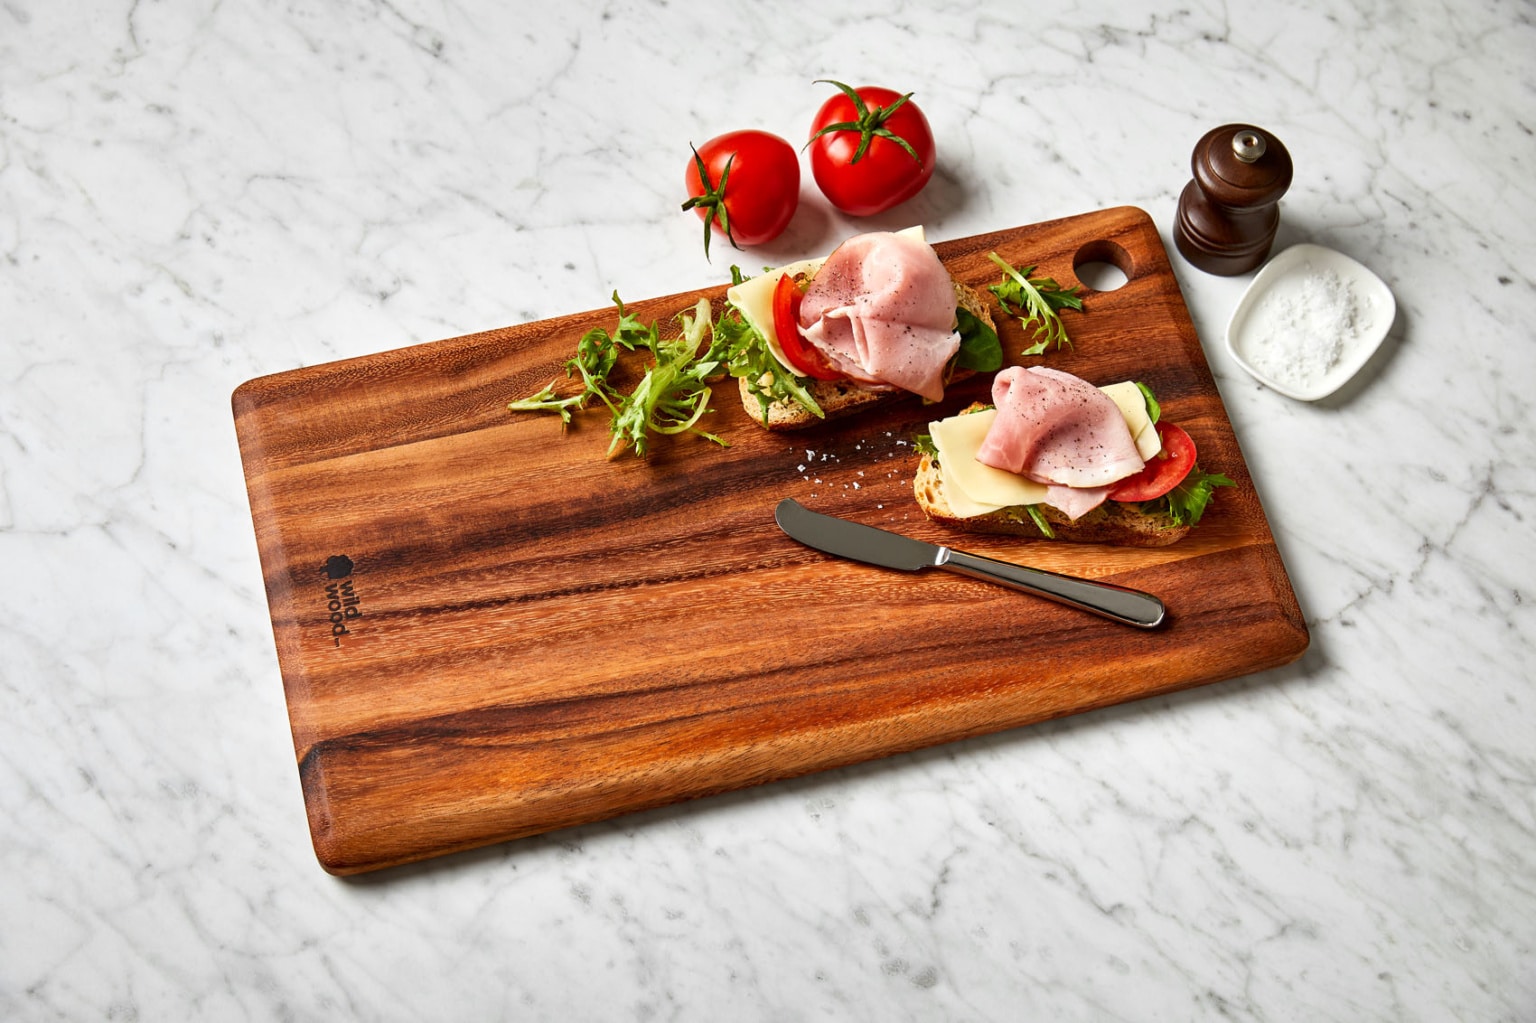 wood cutting board vs plastic cutting board and how to sanitise